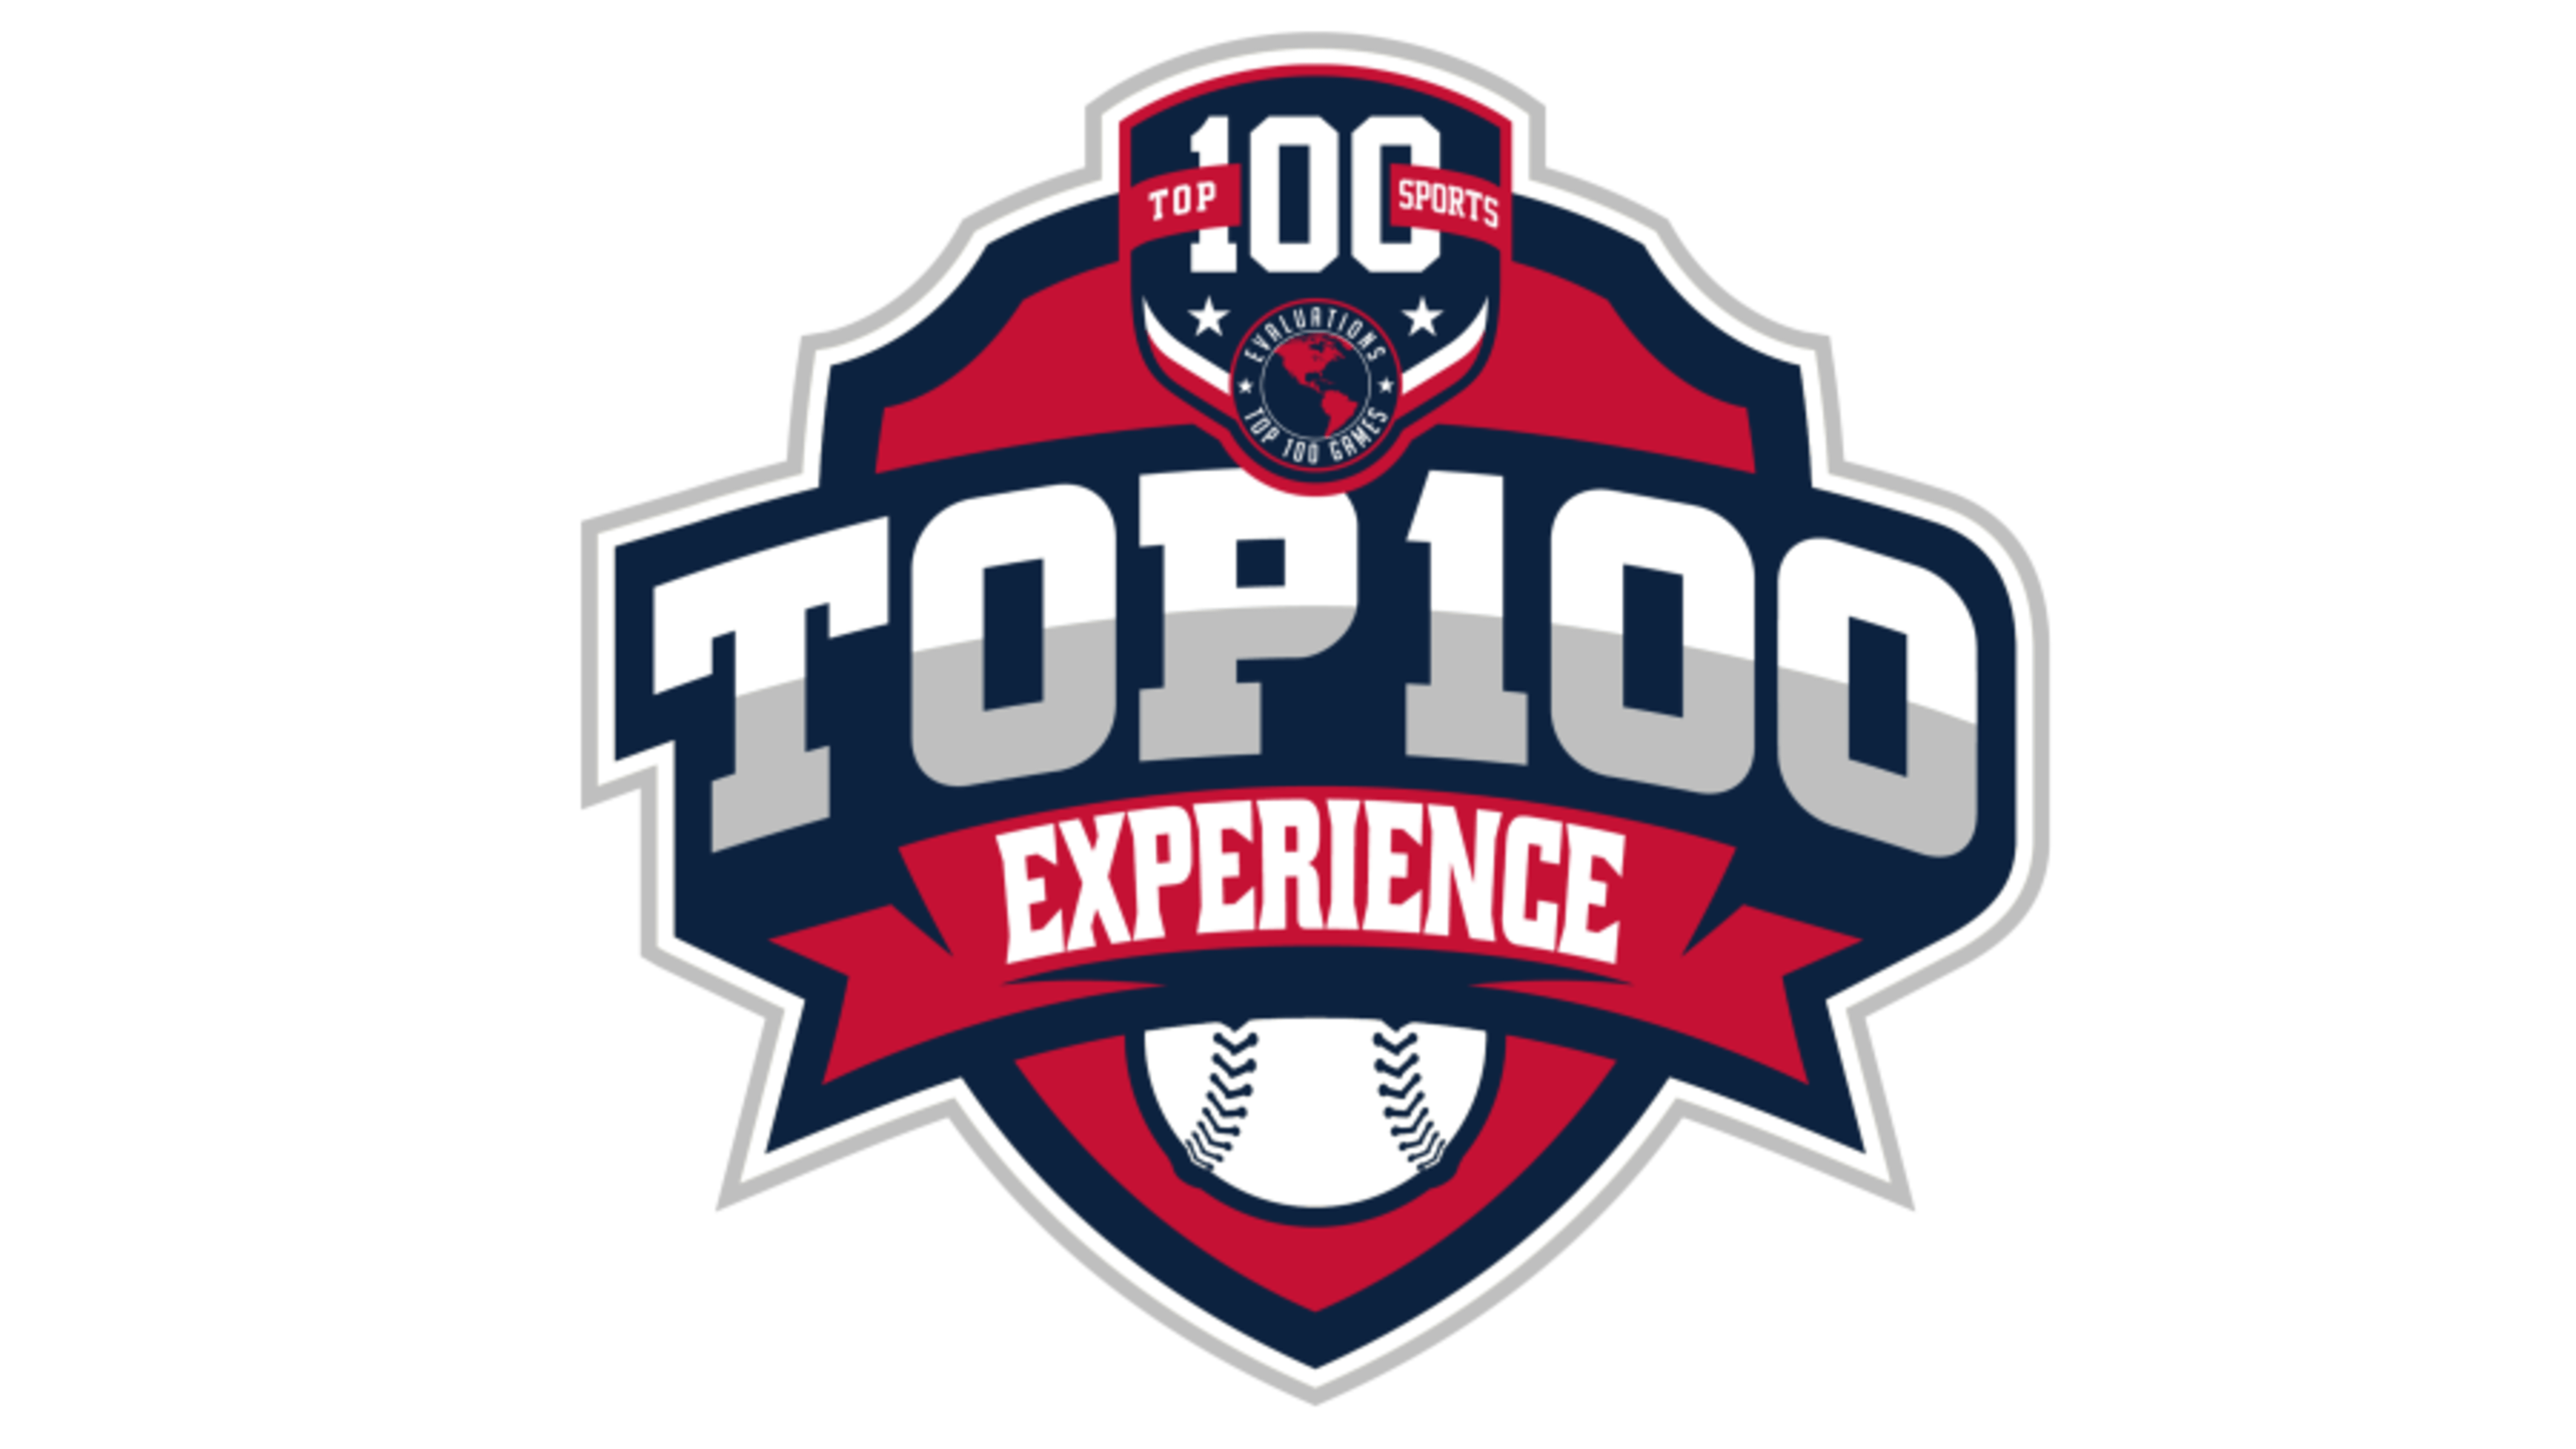 TOP 100 Experience Top 100 Sports